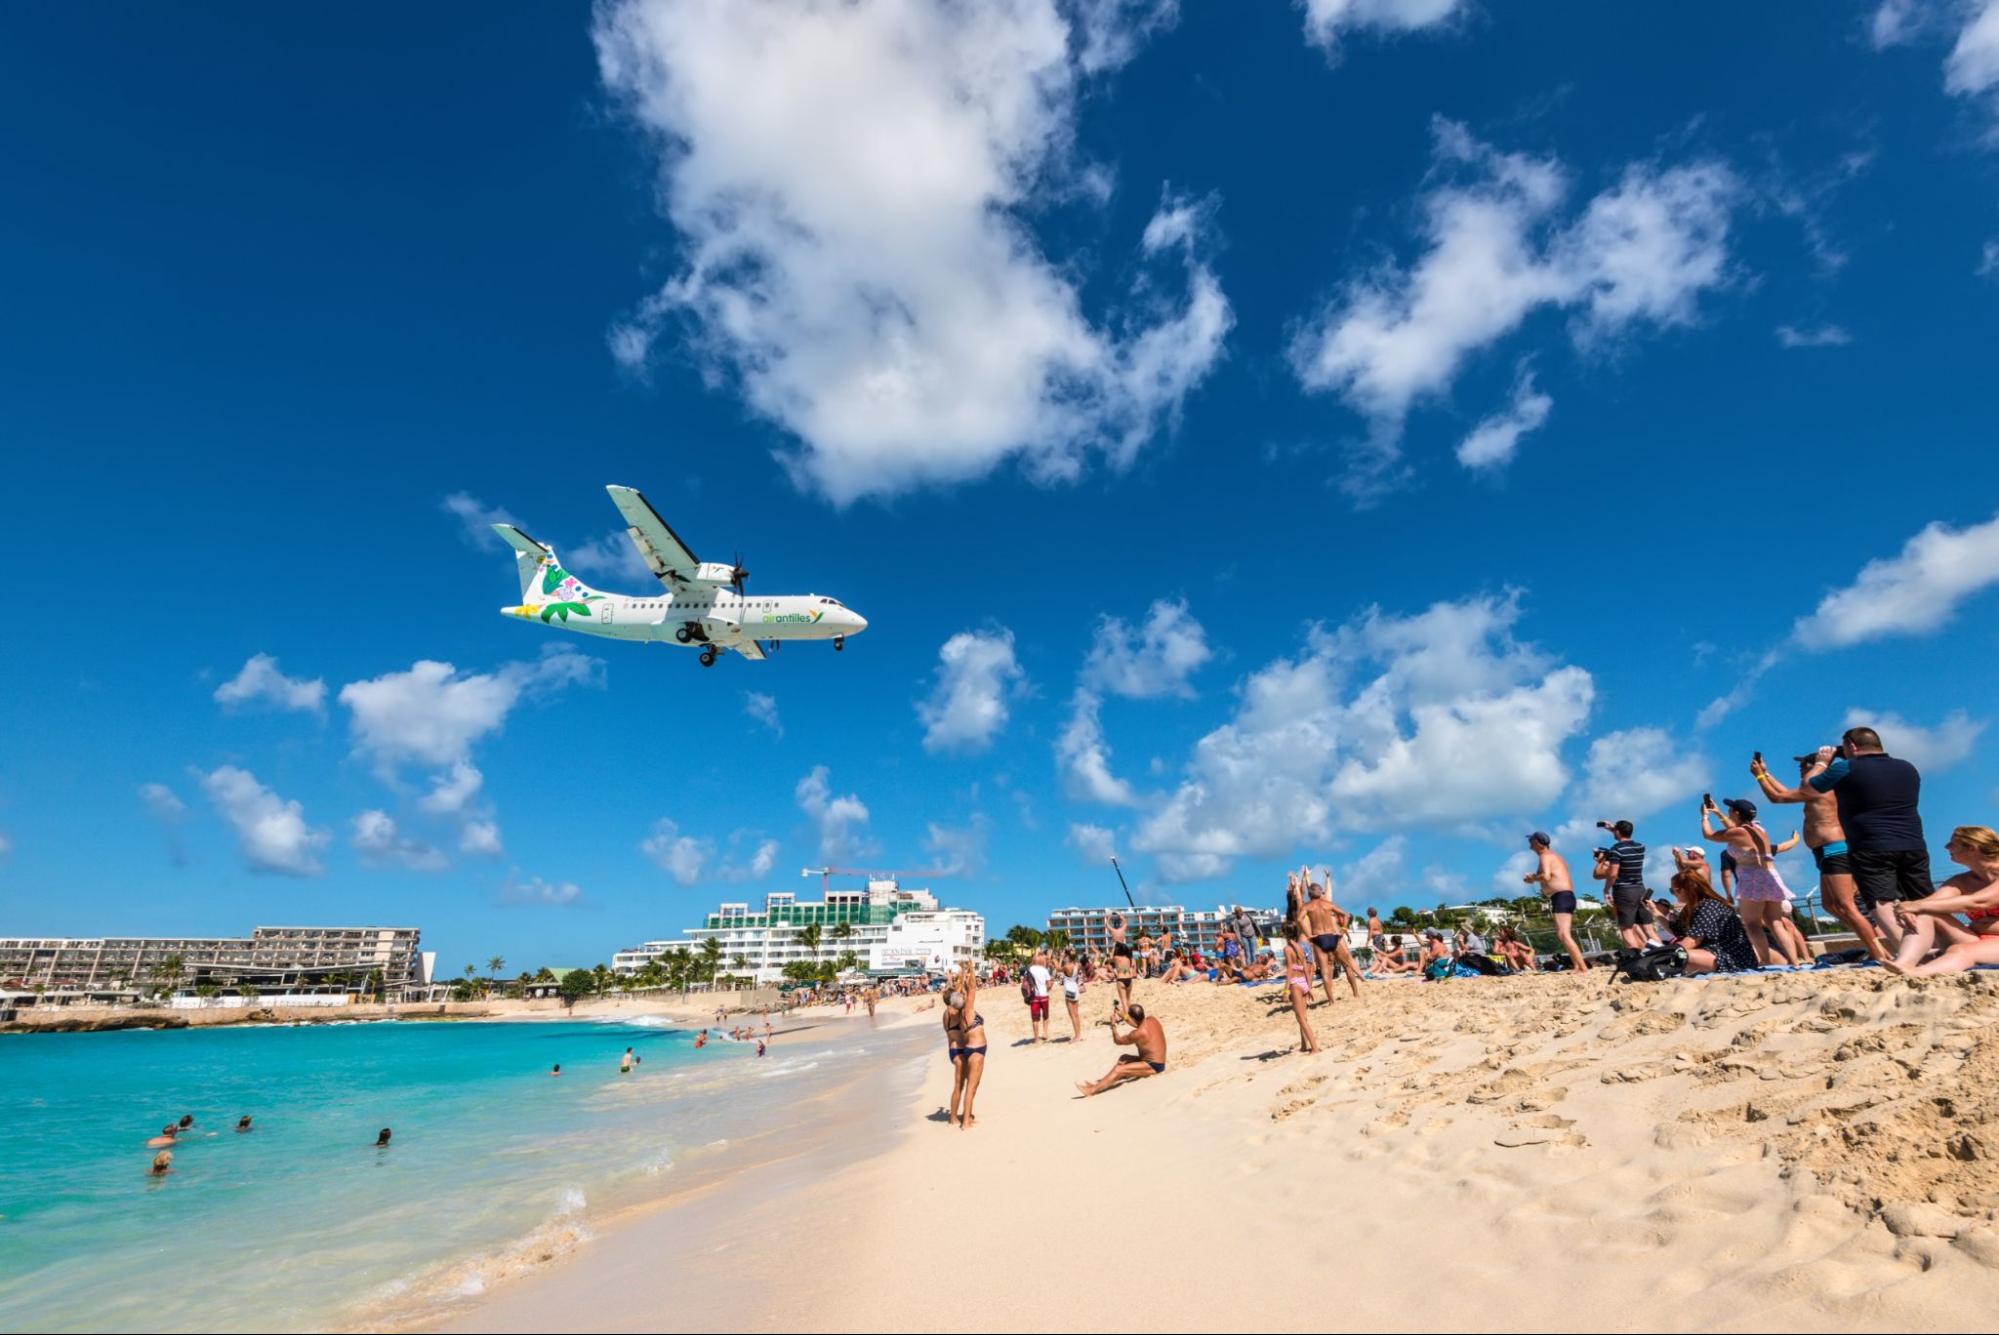 The short runway gives beach goers close proximity views of the planes